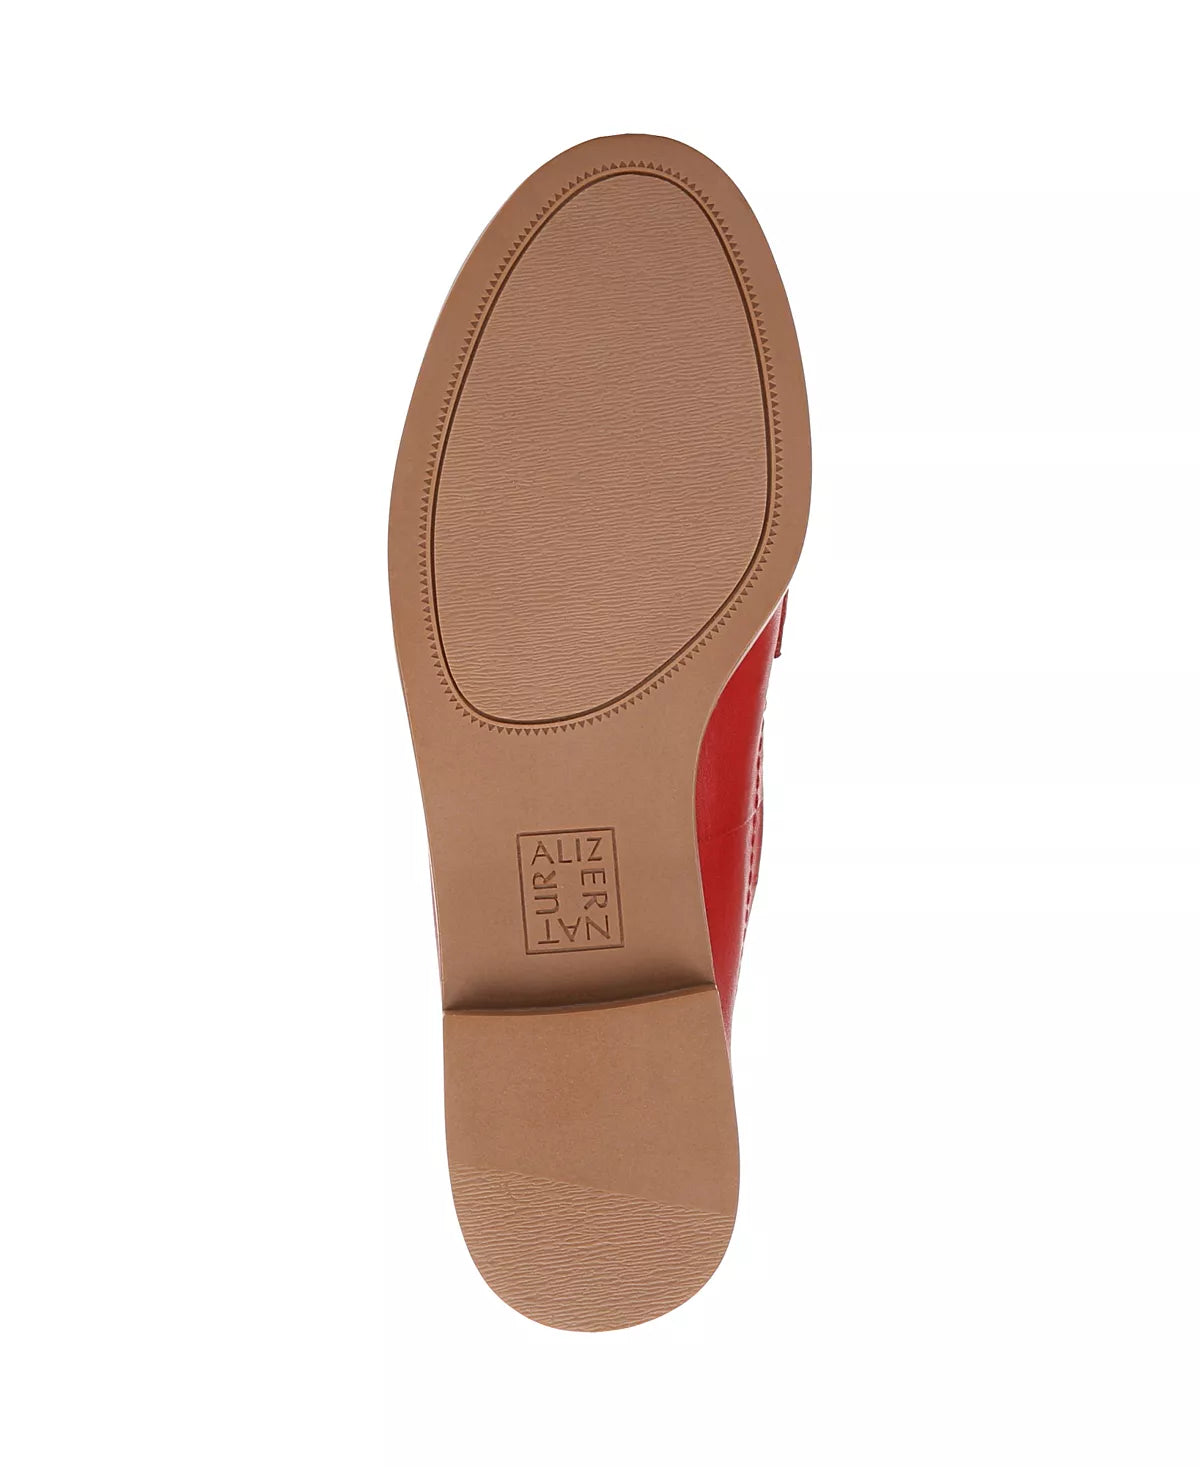 NATURALIZER RED BELL DETAIL LOAFERS